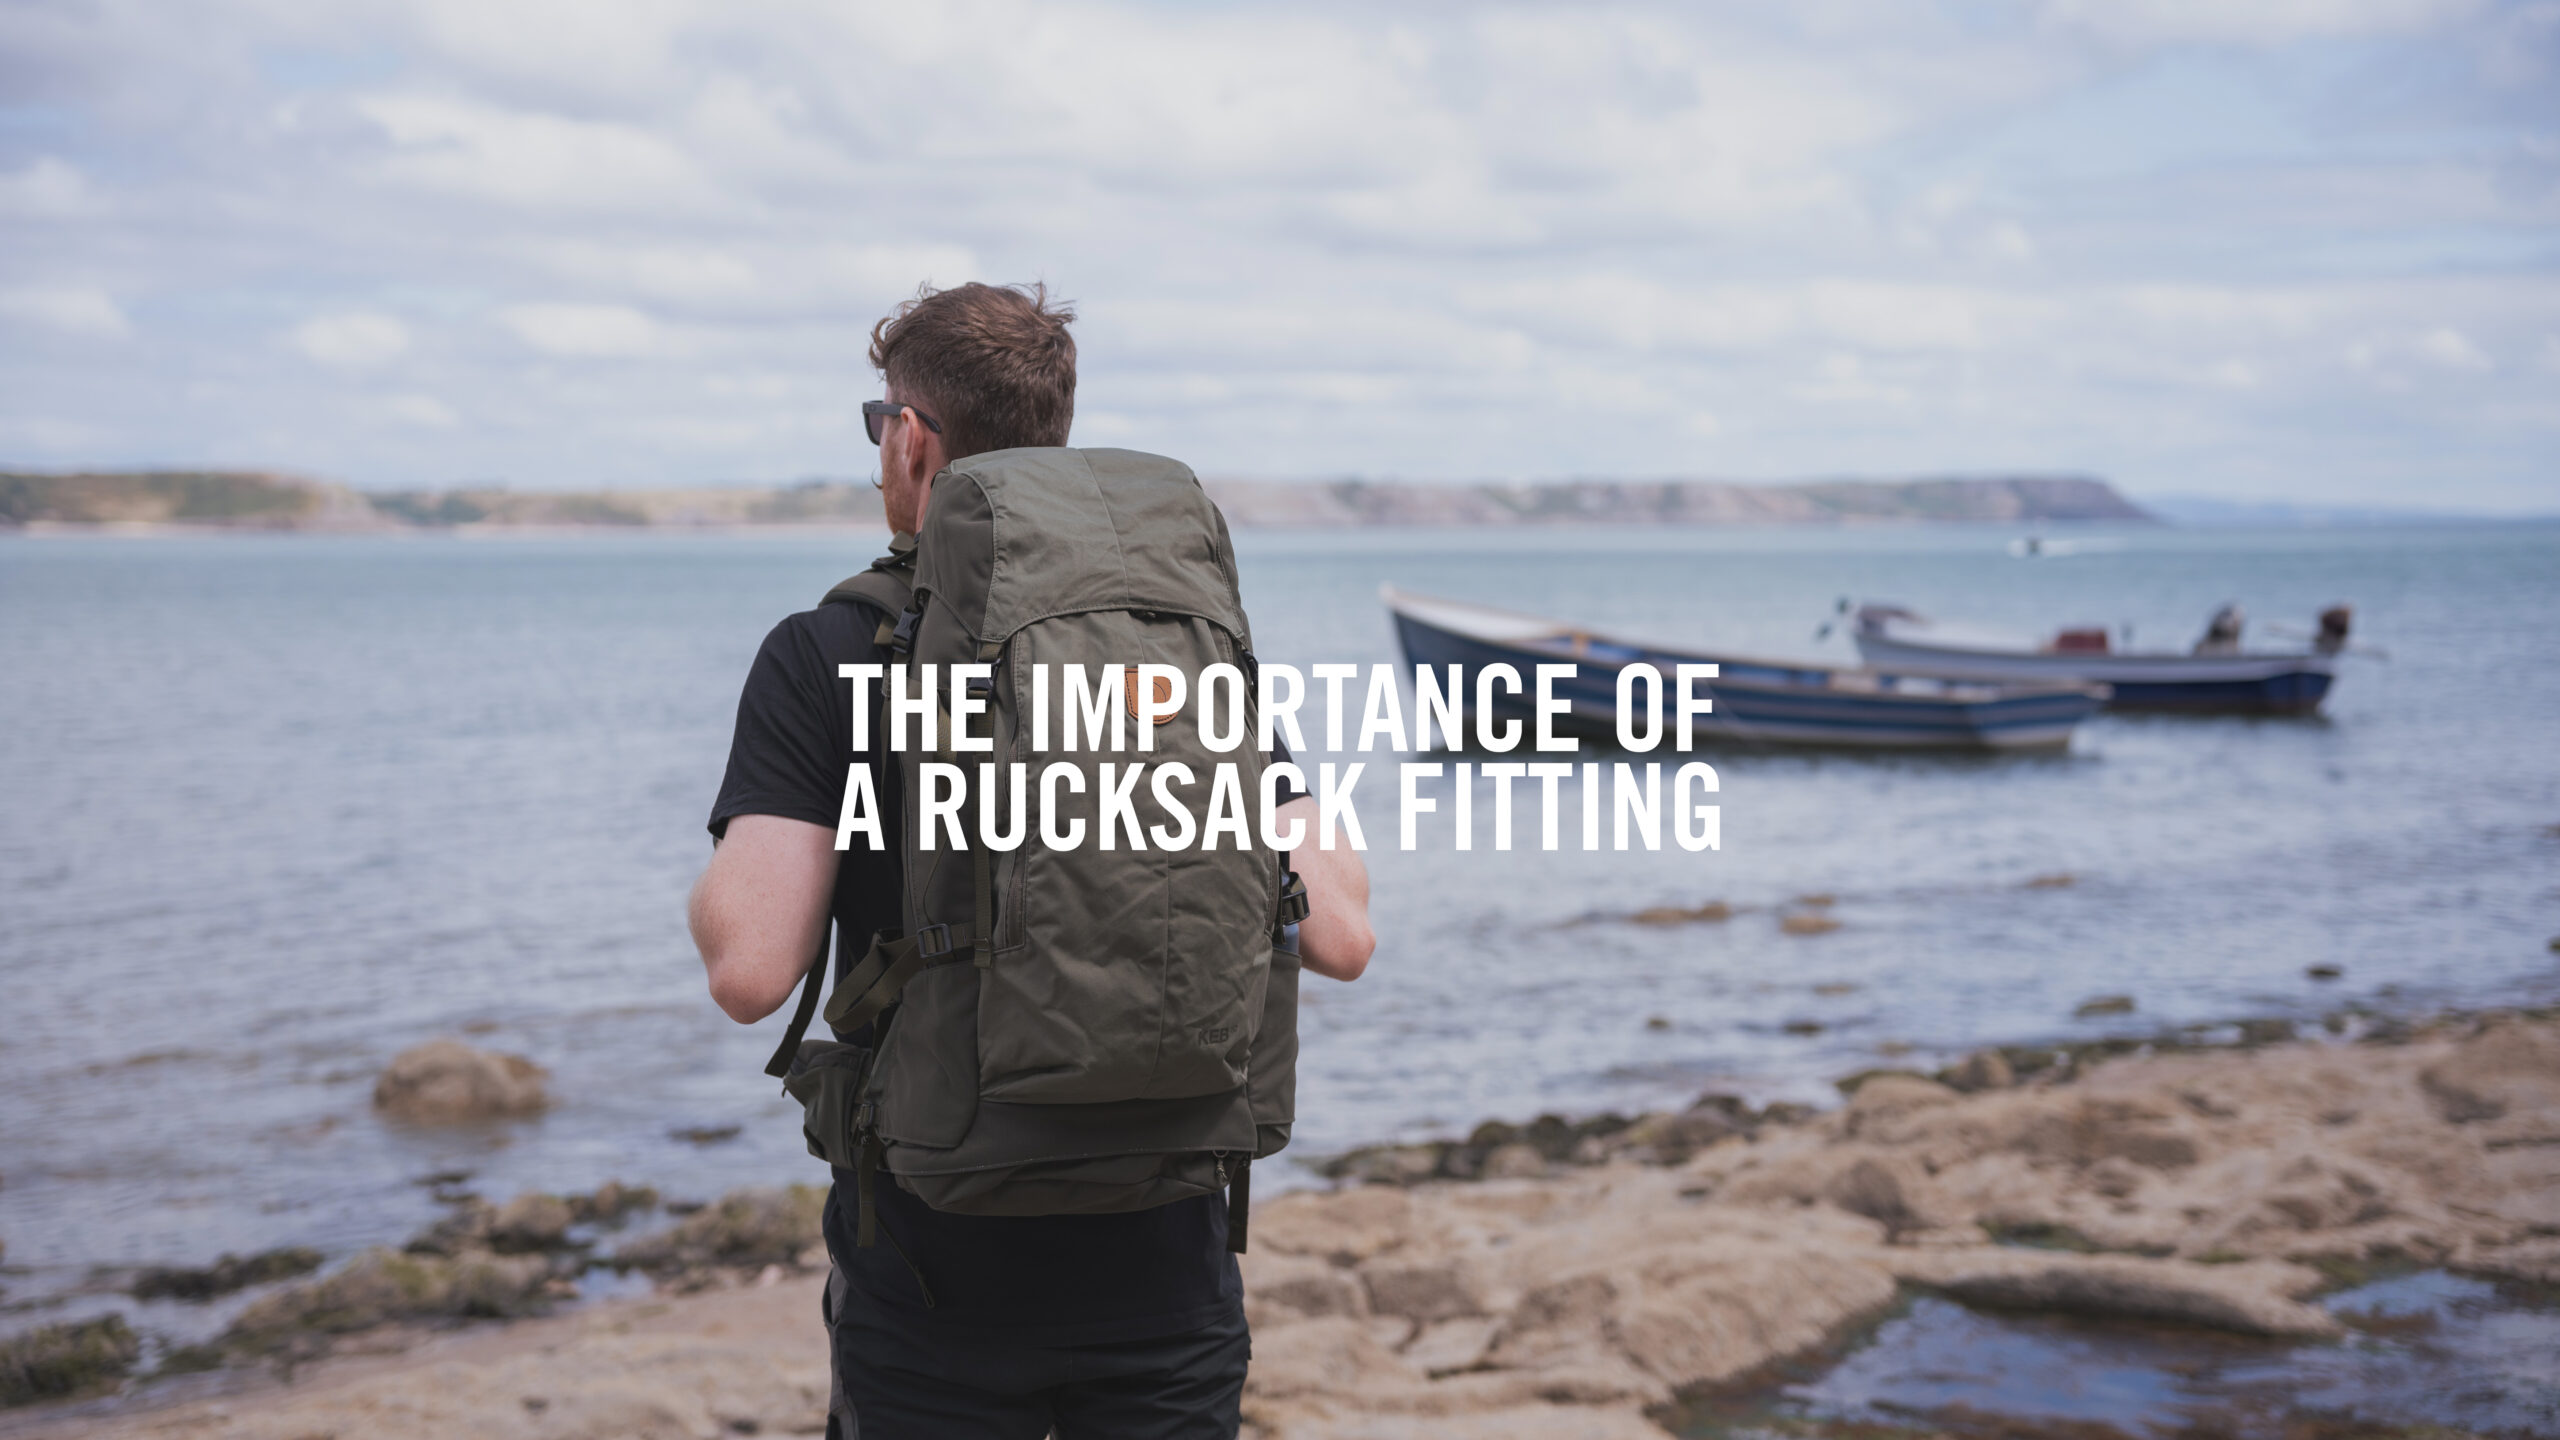 The Importance of a Rucksack Fitting